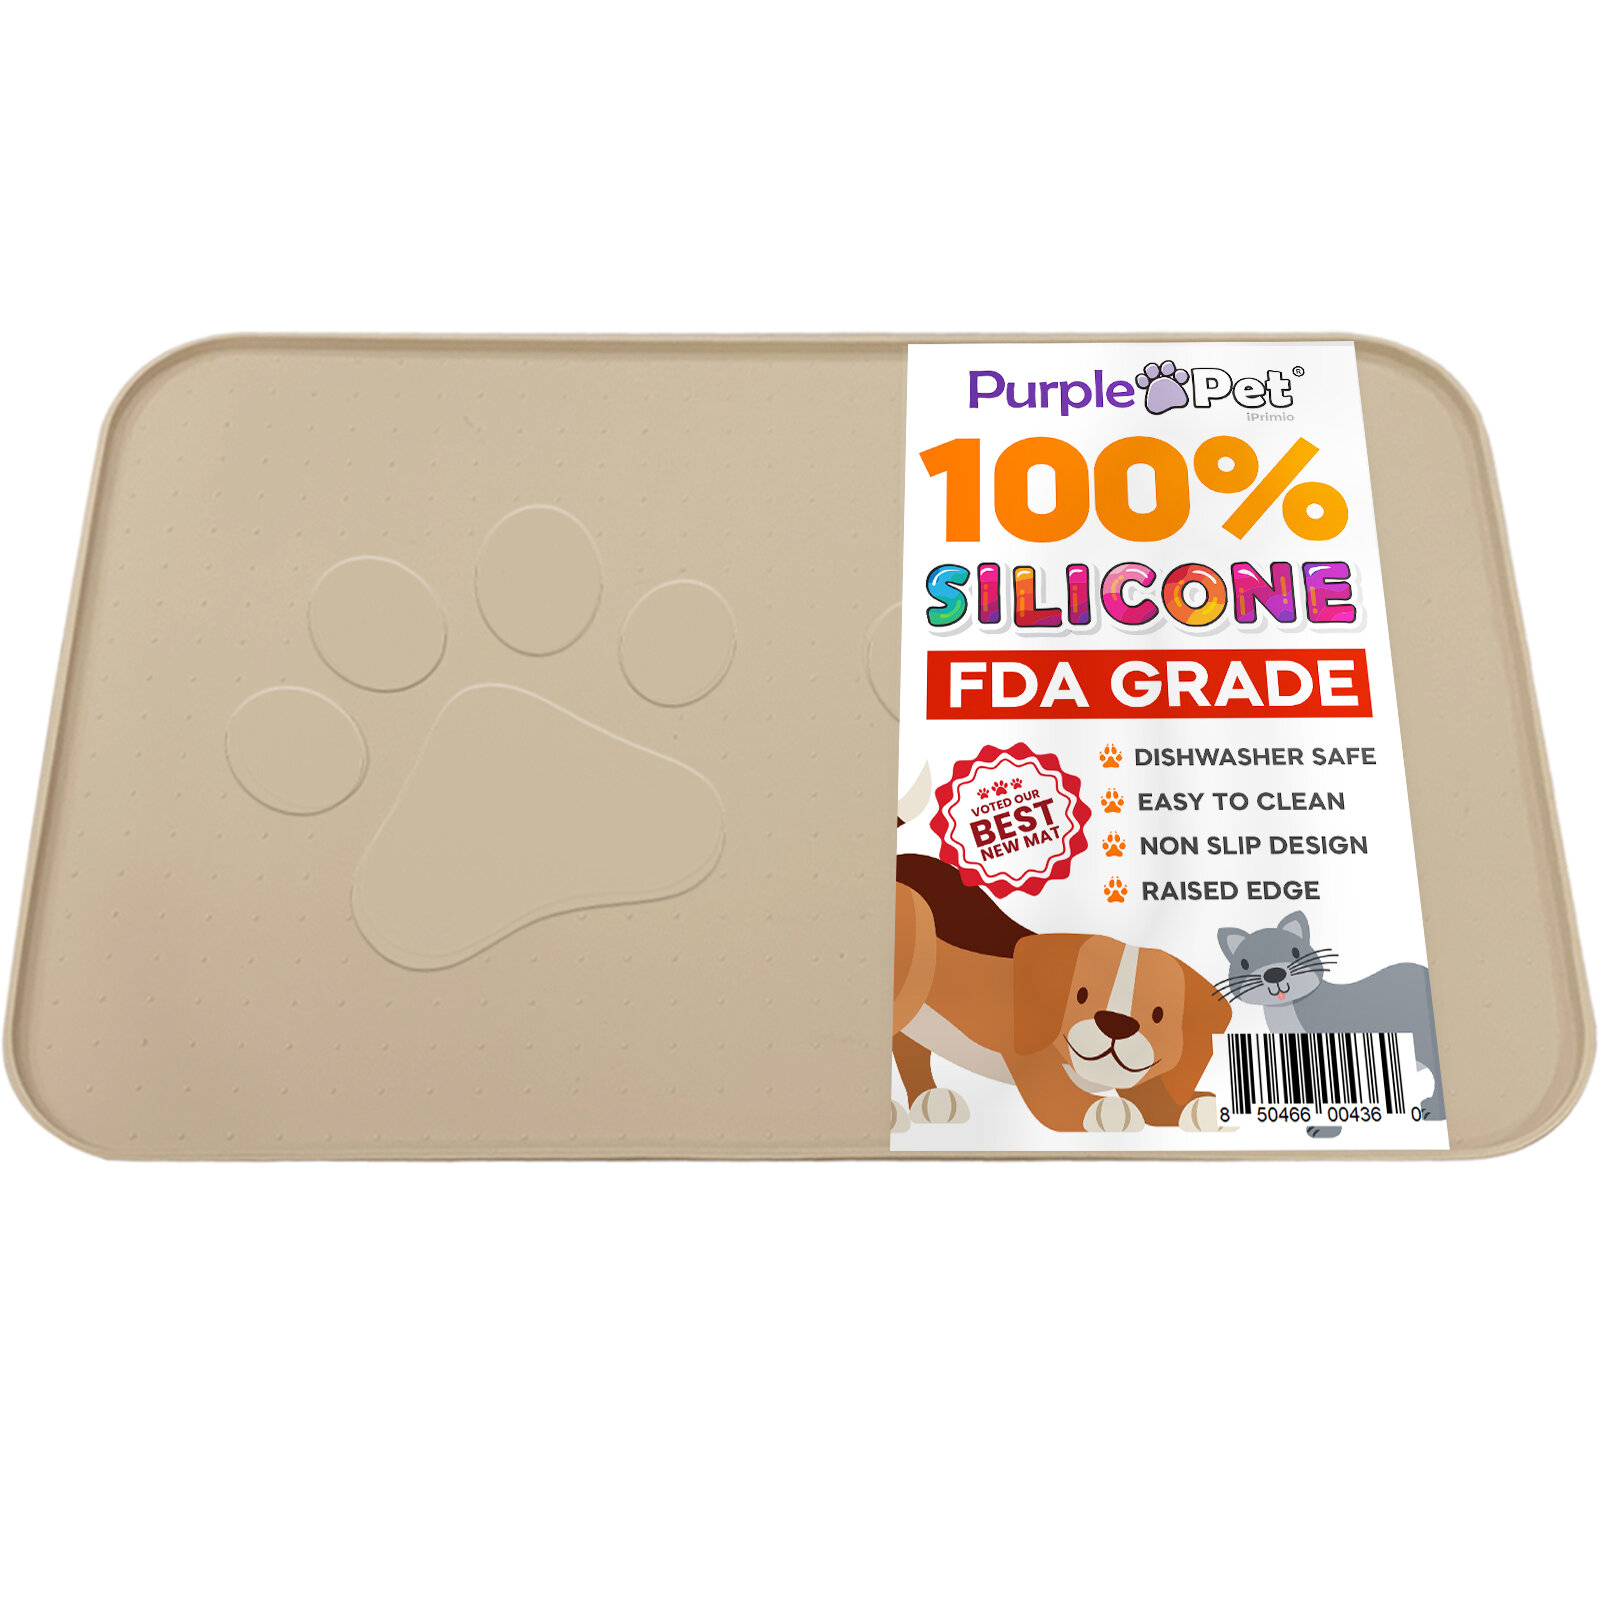 Paw Print Pet Feeding Mat For Dogs, High Absorbent Quick Dry Dog